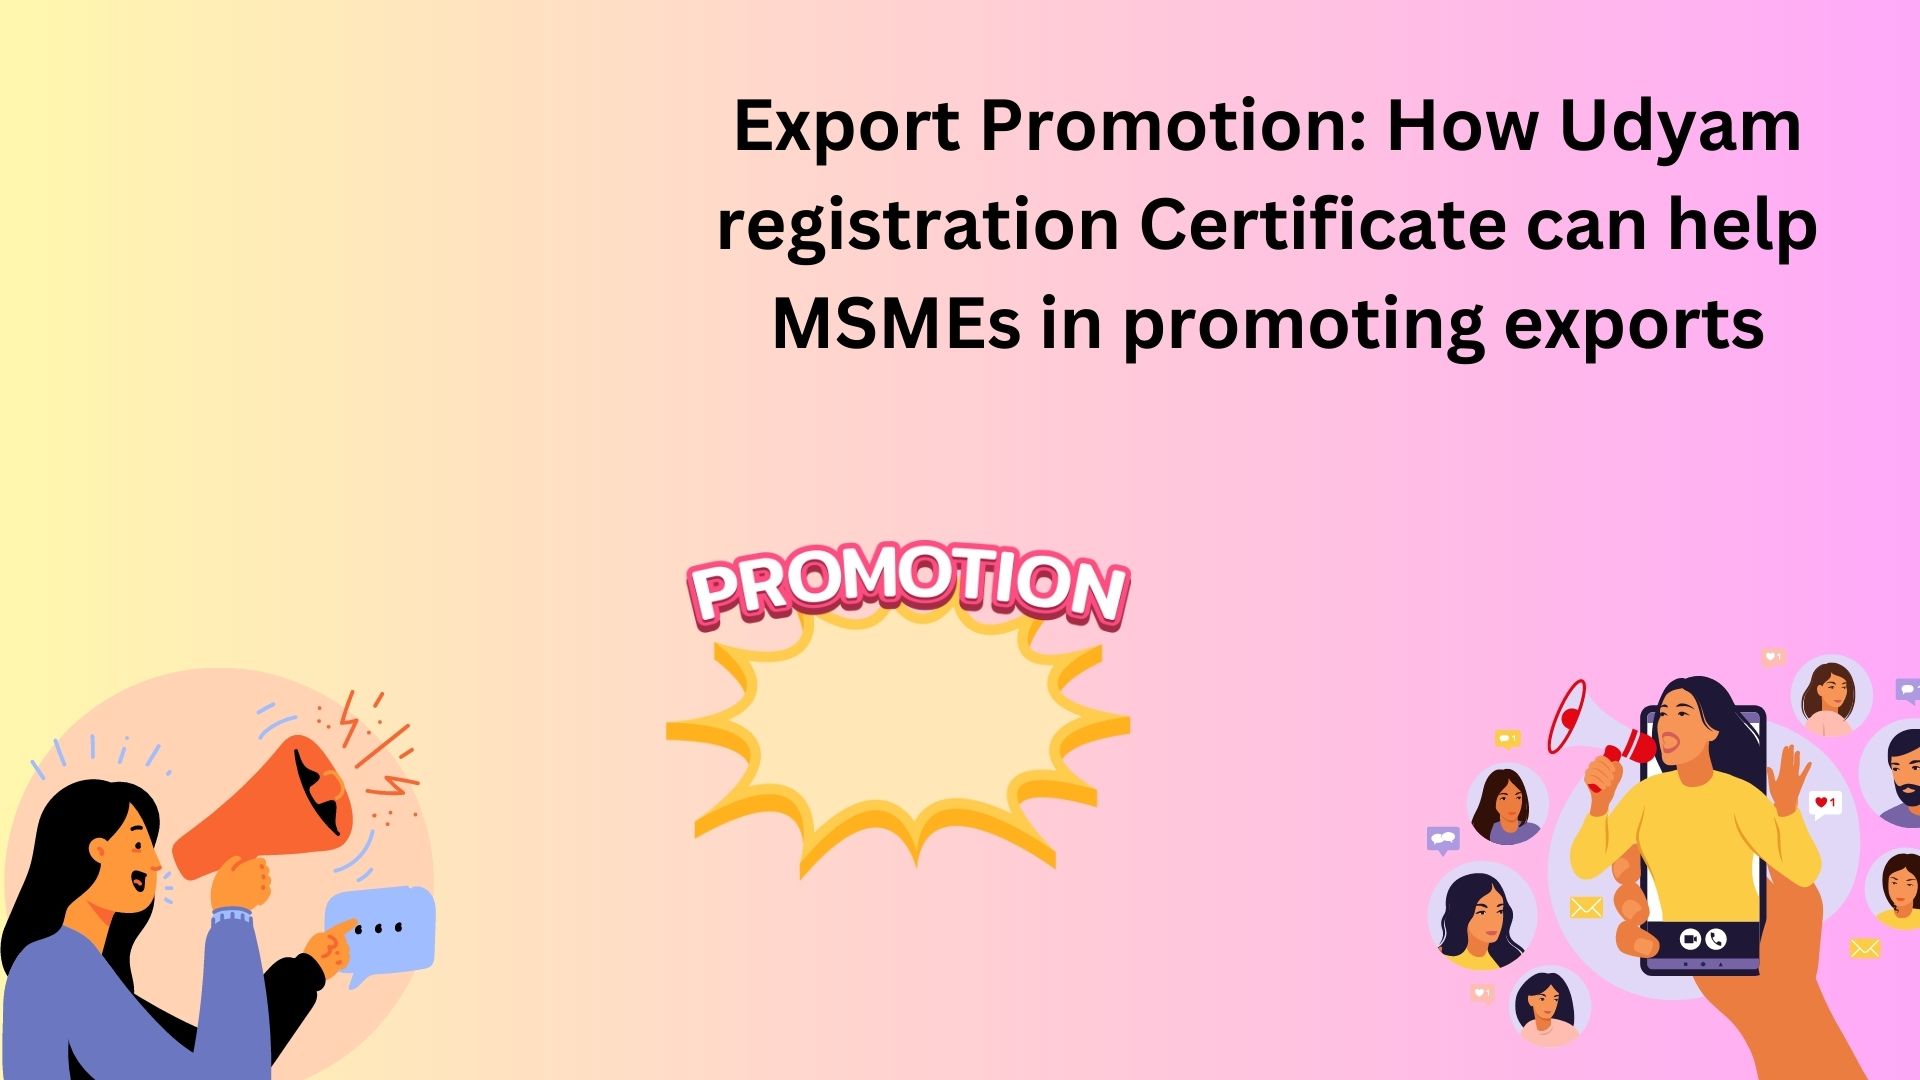 Export Promotion How Udyam registration Certificate can help MSMEs in promoting exports